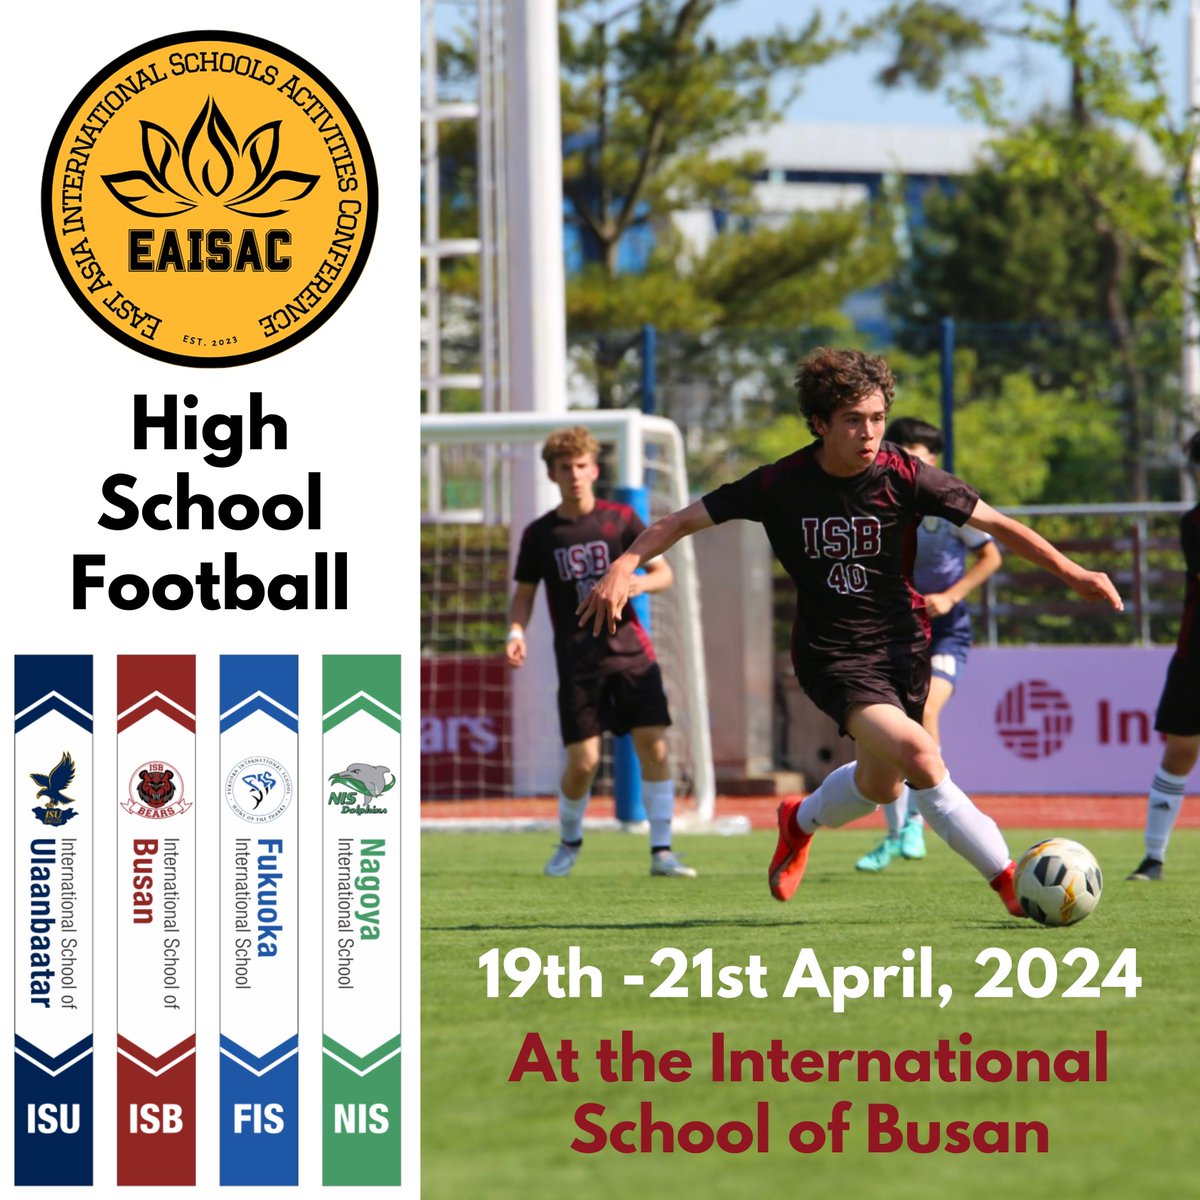 We look forward to welcoming @NagoyaIS, @FISSharks & @isumongolia for the #EAISAC High School Football Tournament on Wednesday 18th April. Go Bears! 🐻 ⚽️ #ISBlearning